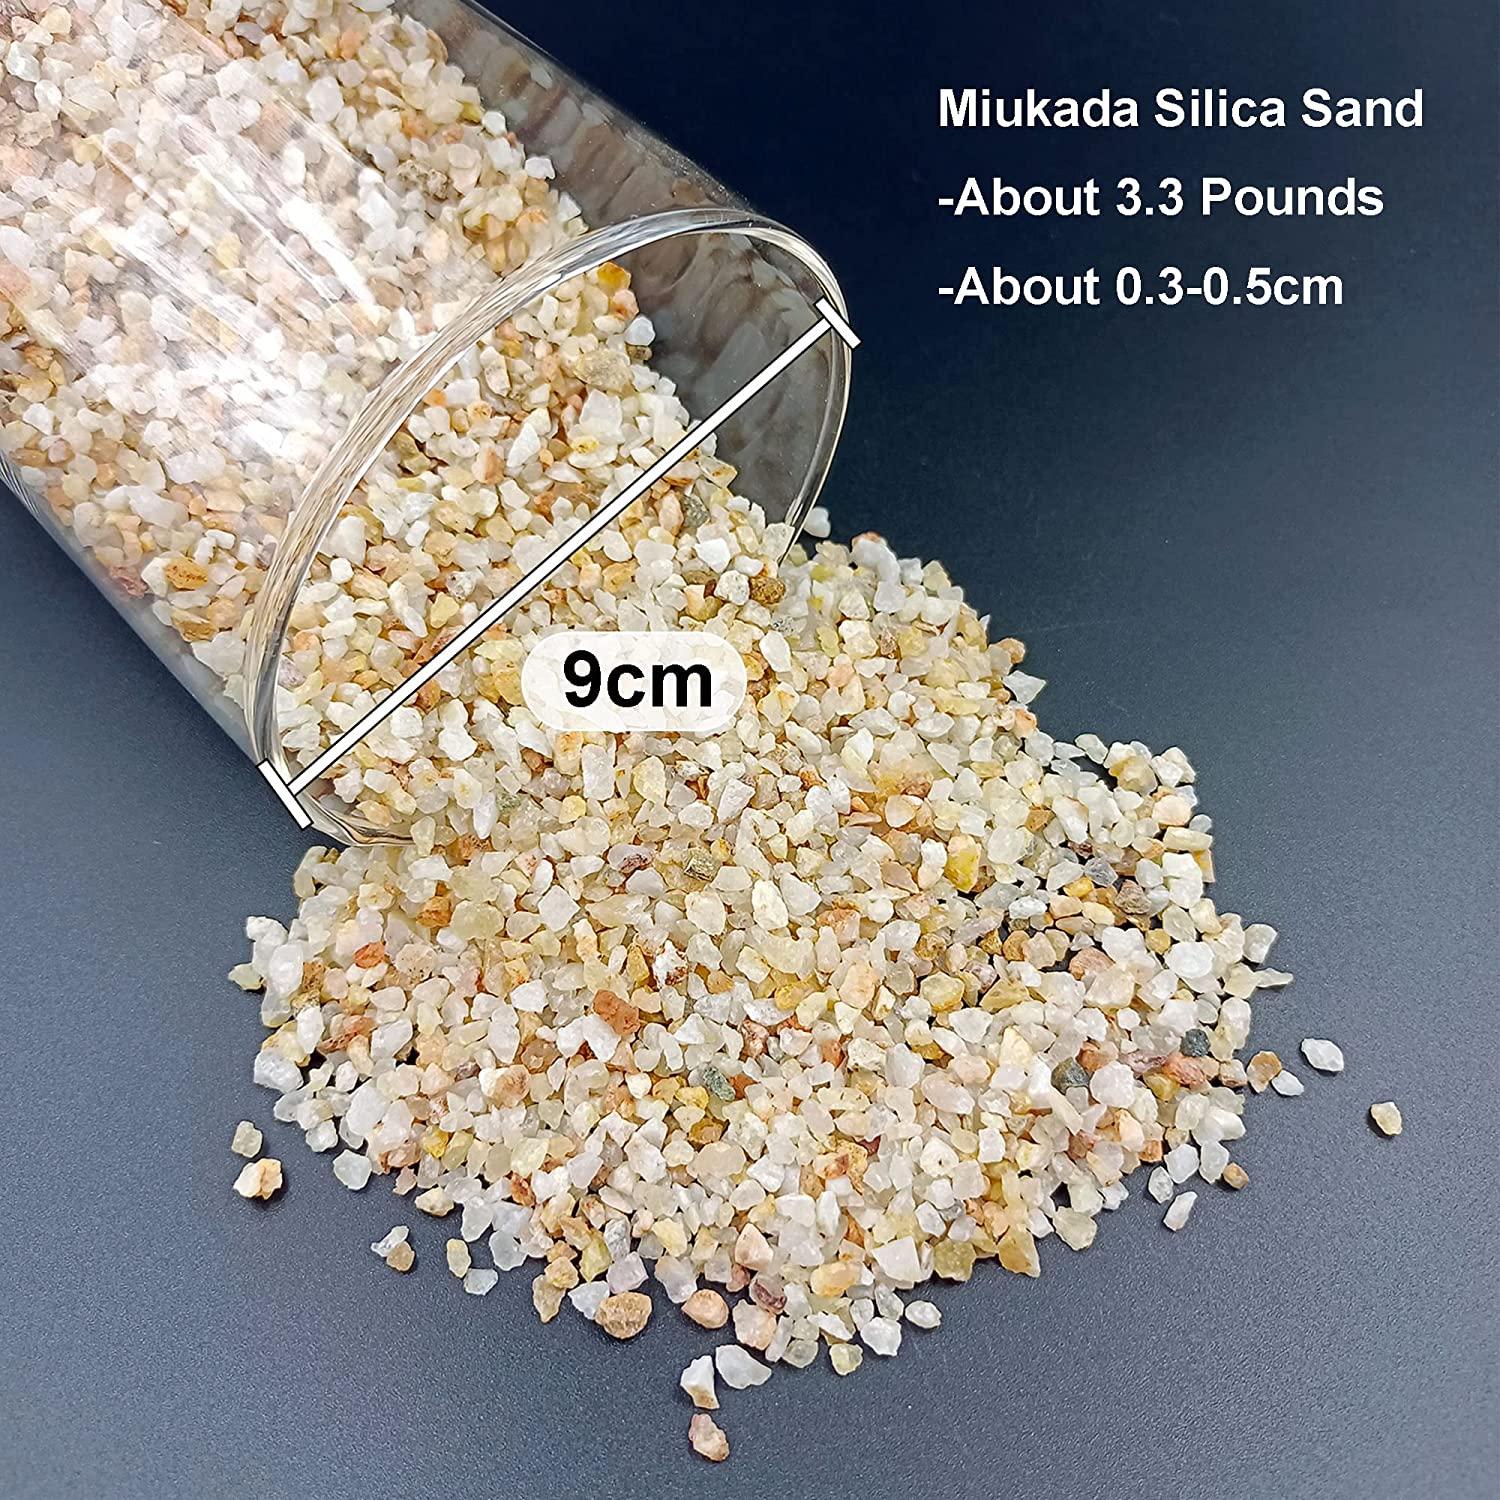 Miukada 3.3 Pounds Coarse Silica Sand, Mini Natural Top Dressing Sand, Mix  Plant Soil Cover for Bonsai, Succulent and Cactus